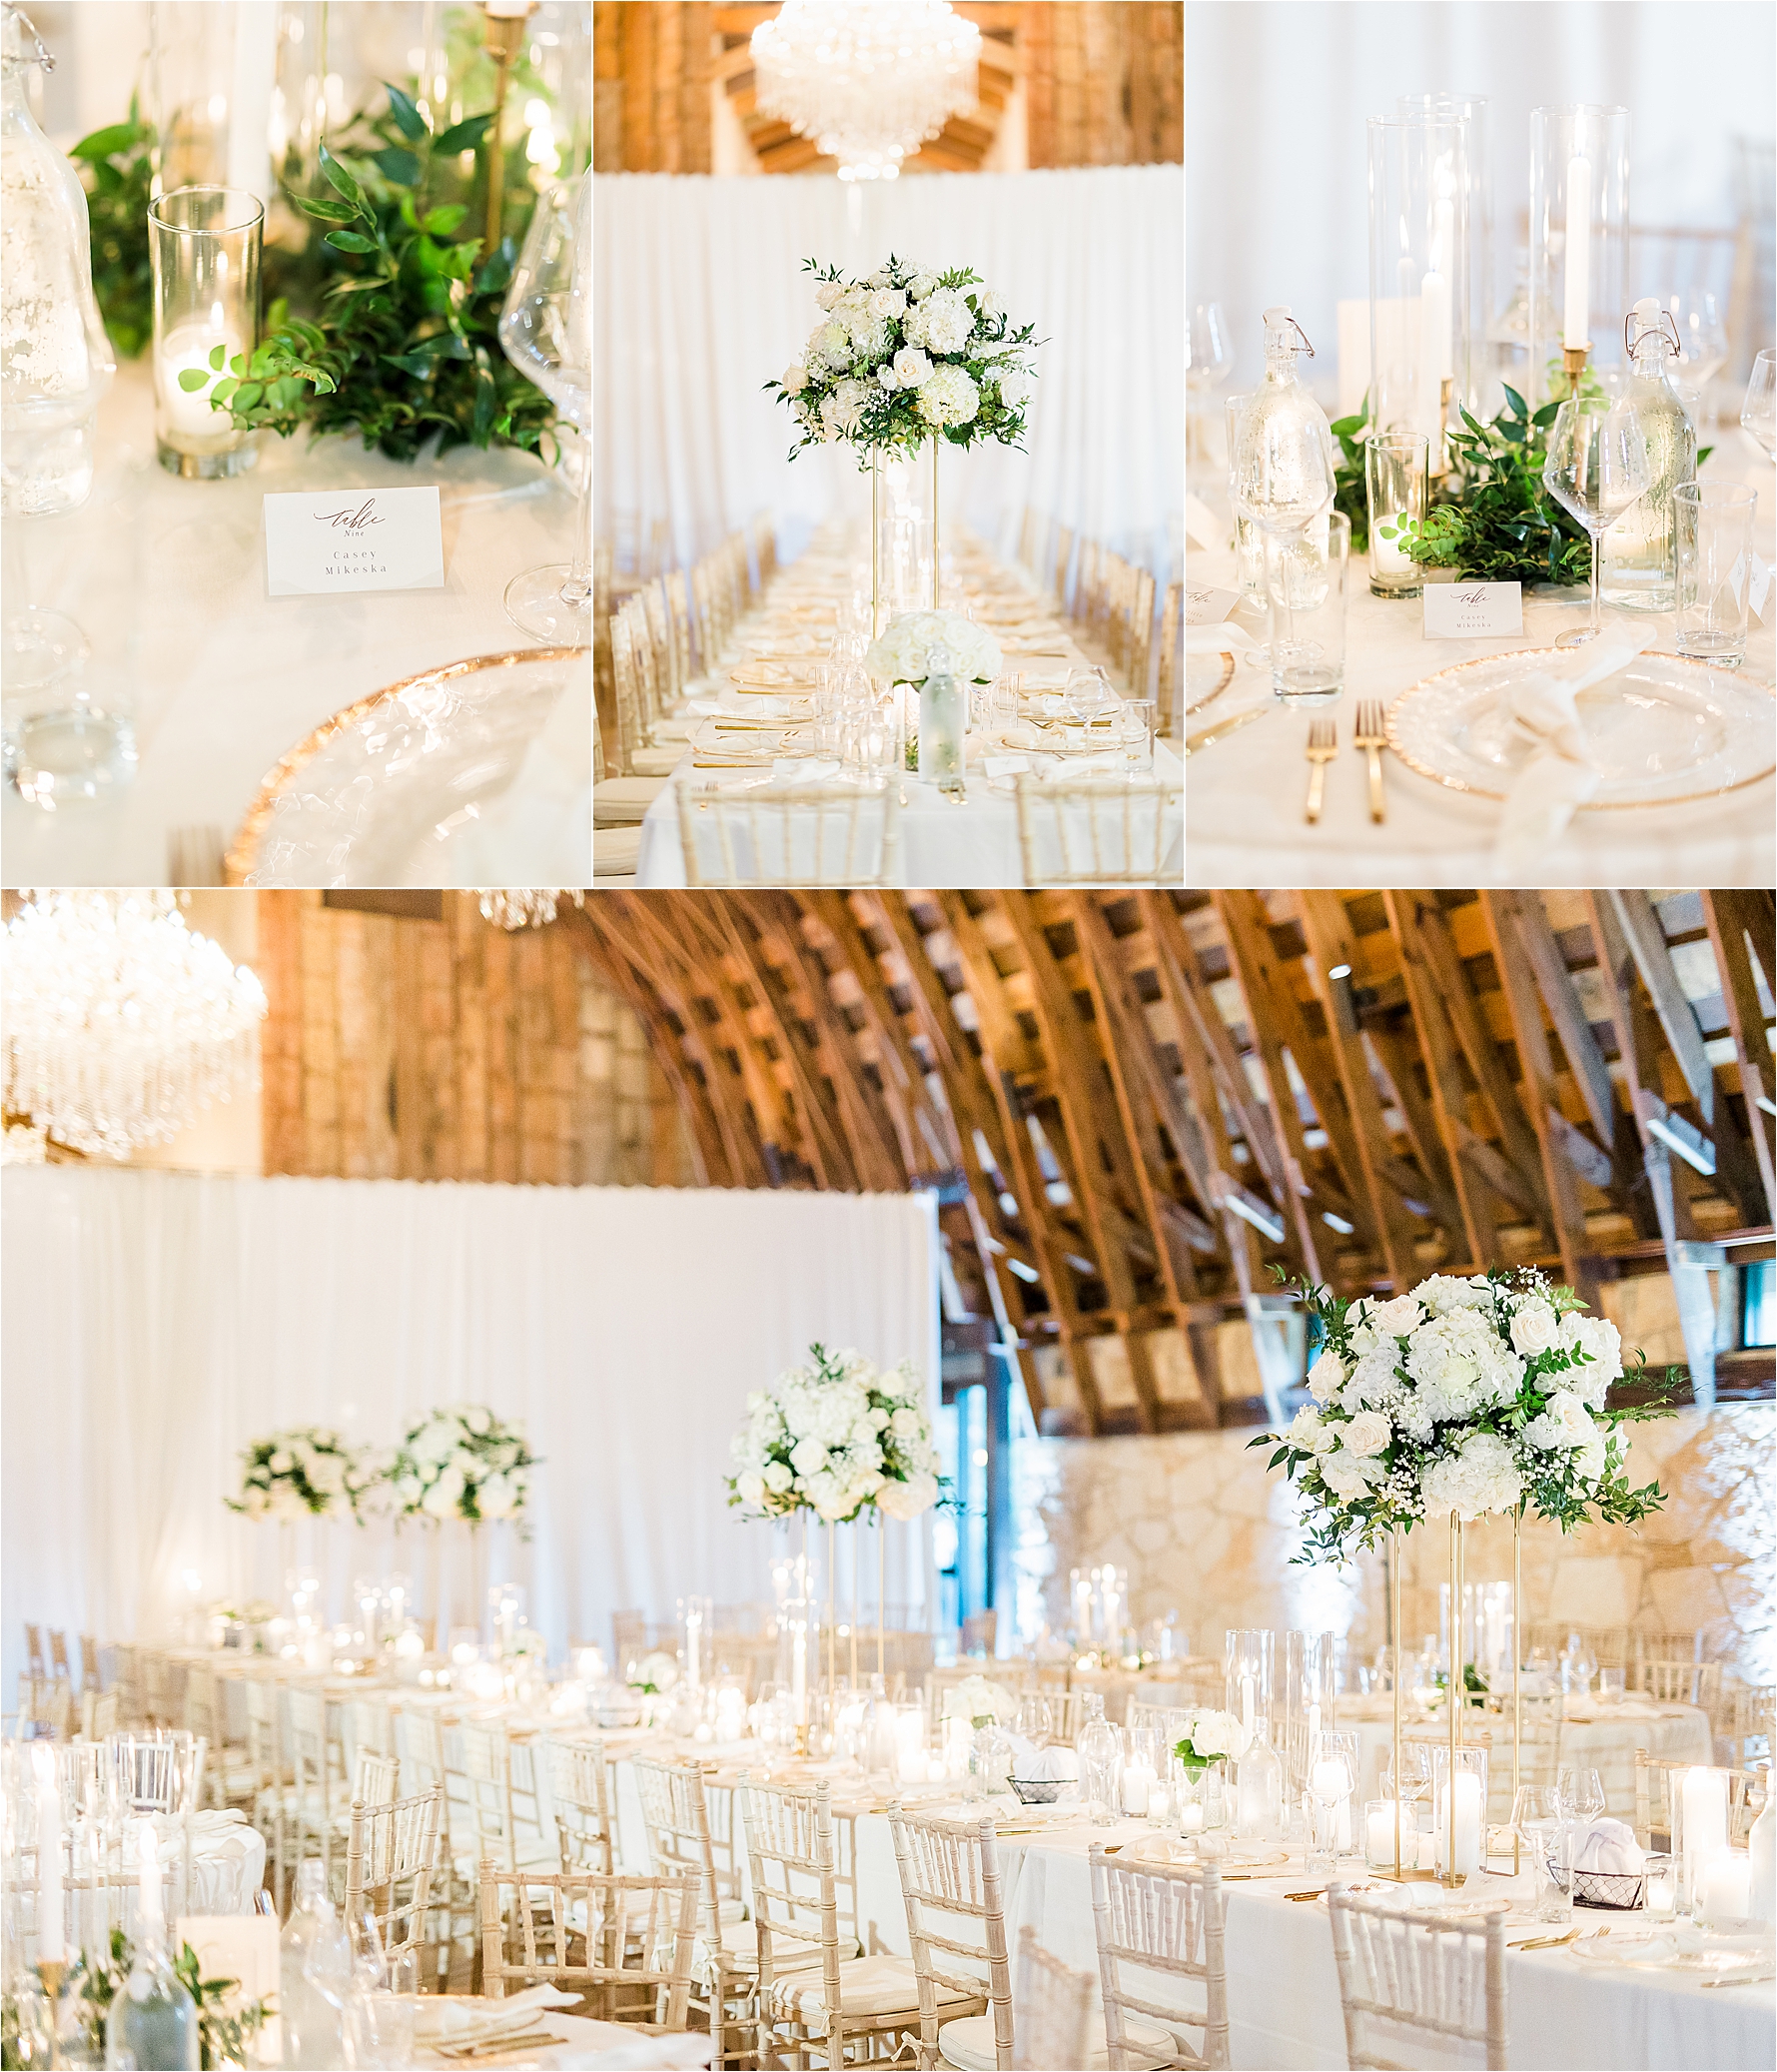 White flowers, greenery and candle light inside barn style venue in Austin, Texas.